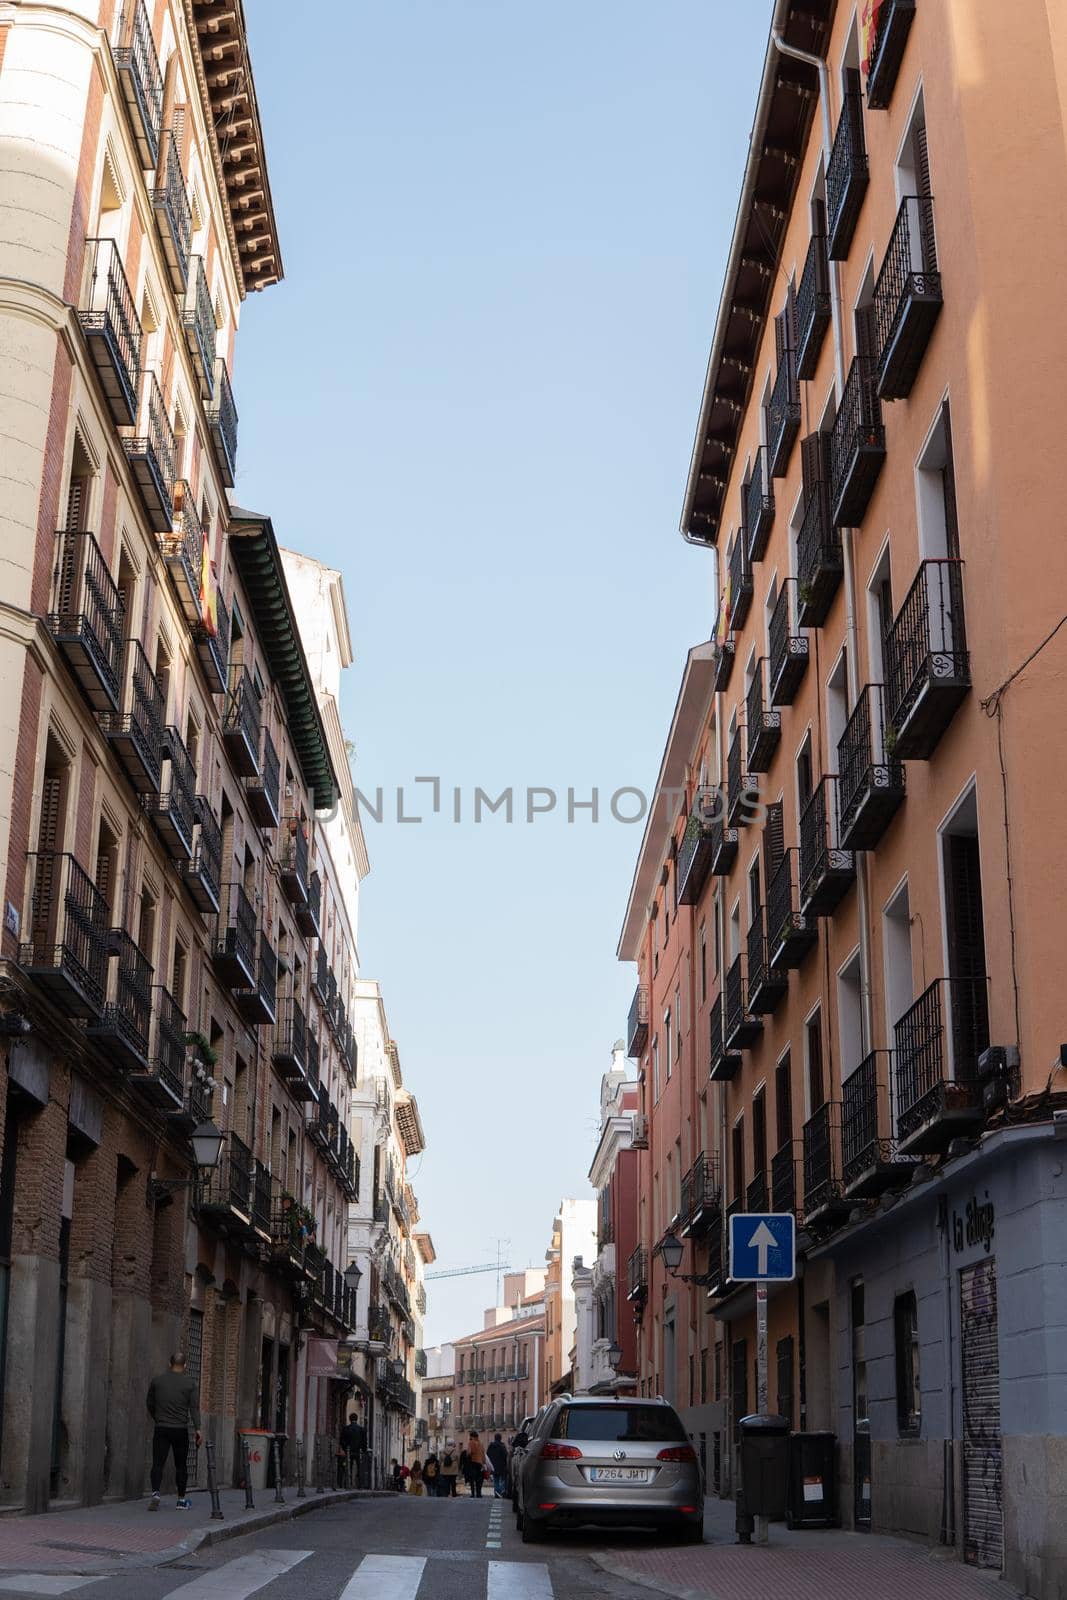 Straight street in madrid surrounded by old and beautiful buildings by xavier_photo